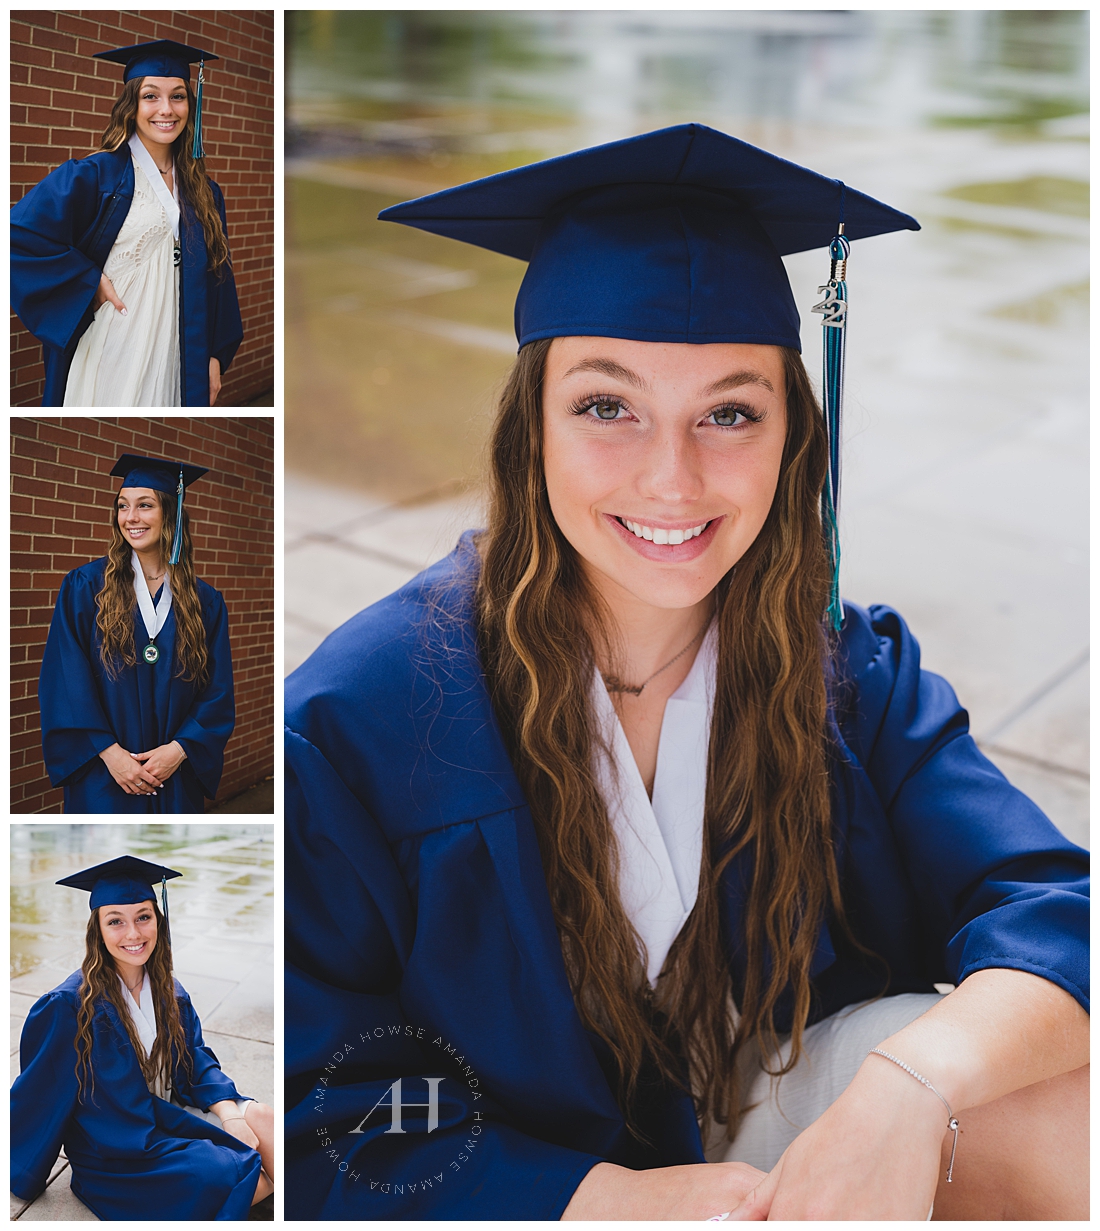 Rainy PNW Grad Portraits that Still Look Amazing | How To Take Graduation Portraits For Rainy Weather, WA Senior Photos | Photographed by the Best Tacoma Senior Portrait Photographer Amanda Howse